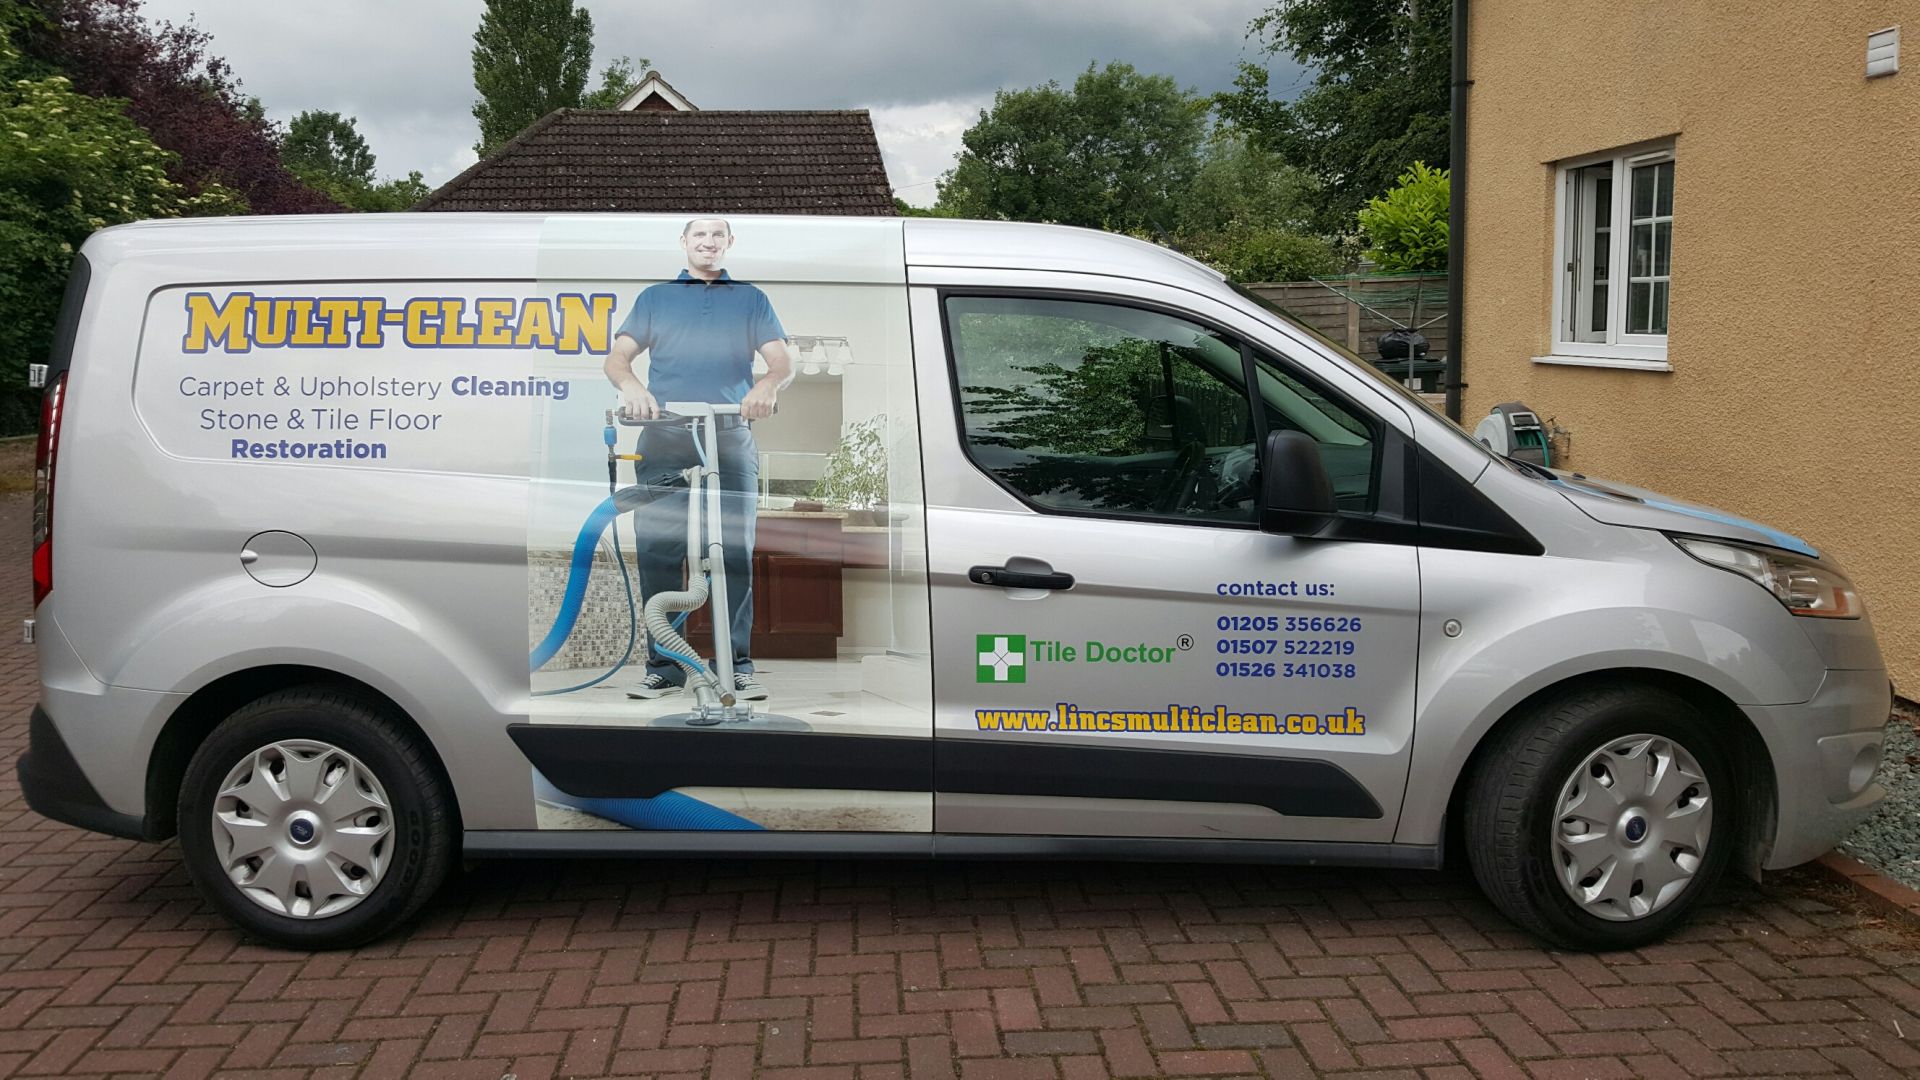 Lincolnshire Cleaning Company - Lincs Multi-Clean.